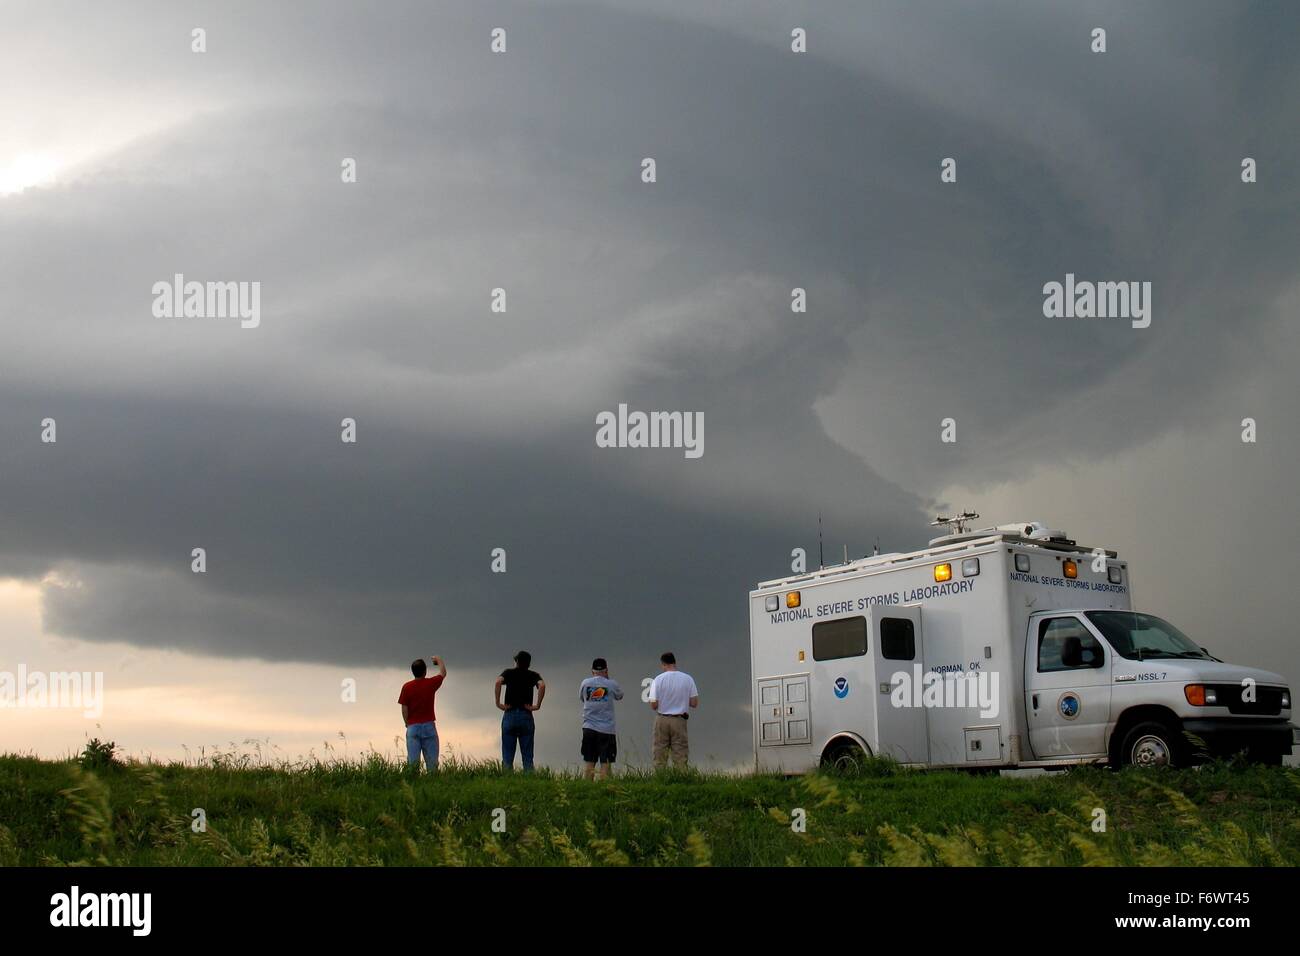 A VORTEX2 field command vehicle from the National Severe Storms Laboratory researches a tornado October 5, 2010 in Kansas. Stock Photo